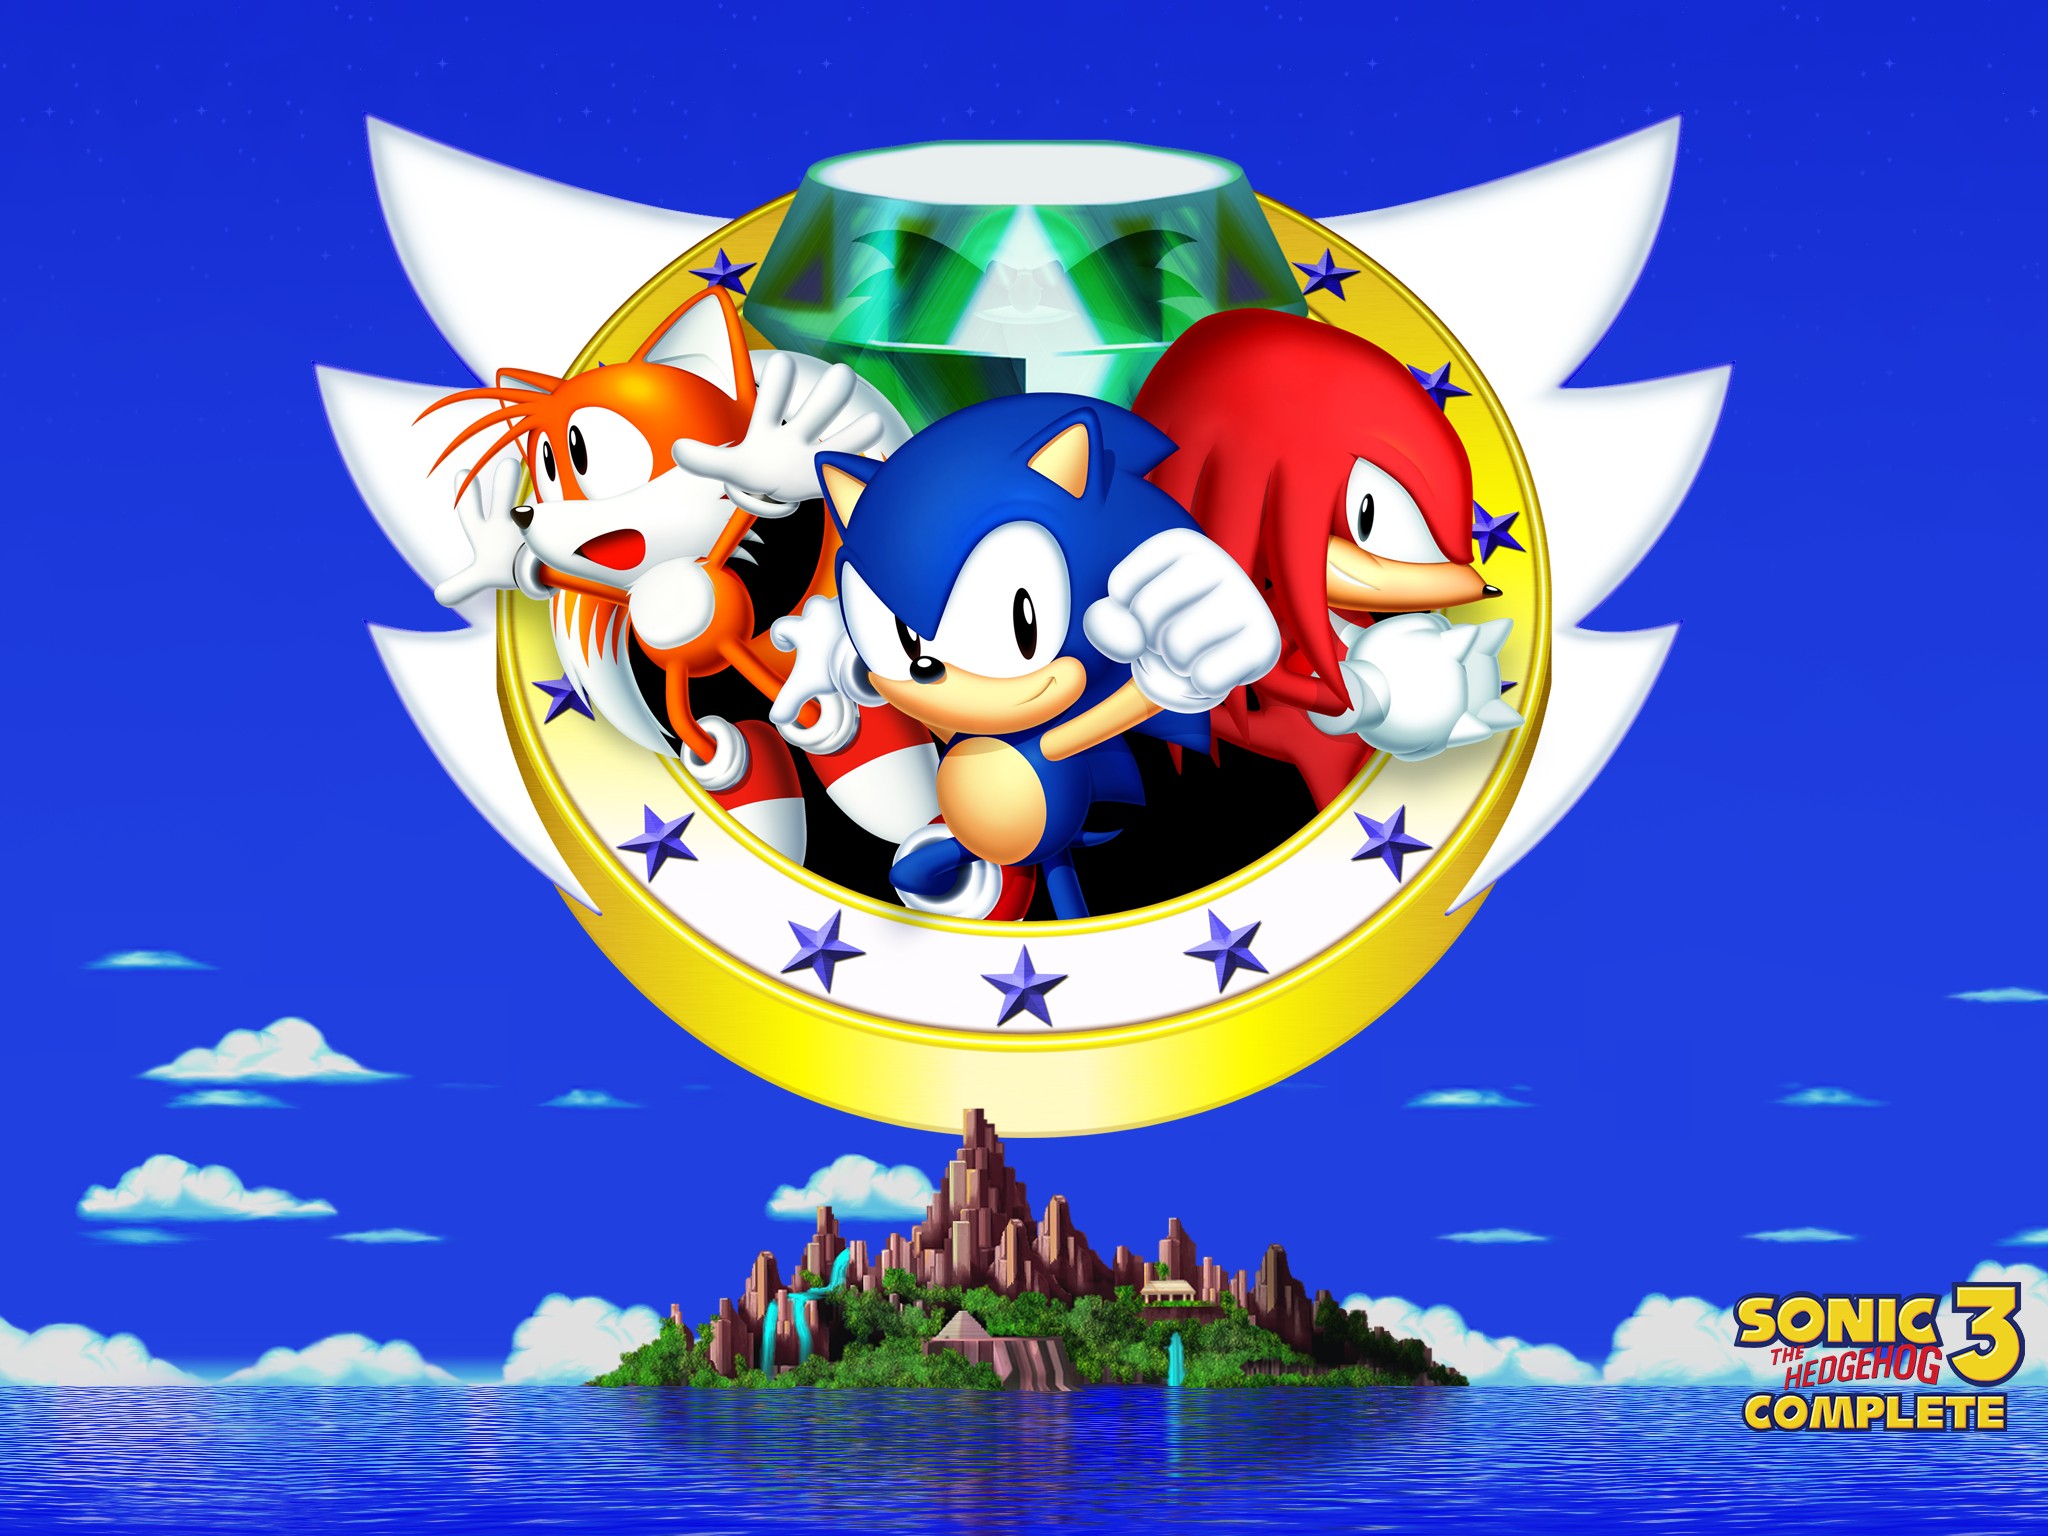 Tails (character), Sonic, Knuckles Wallpaper